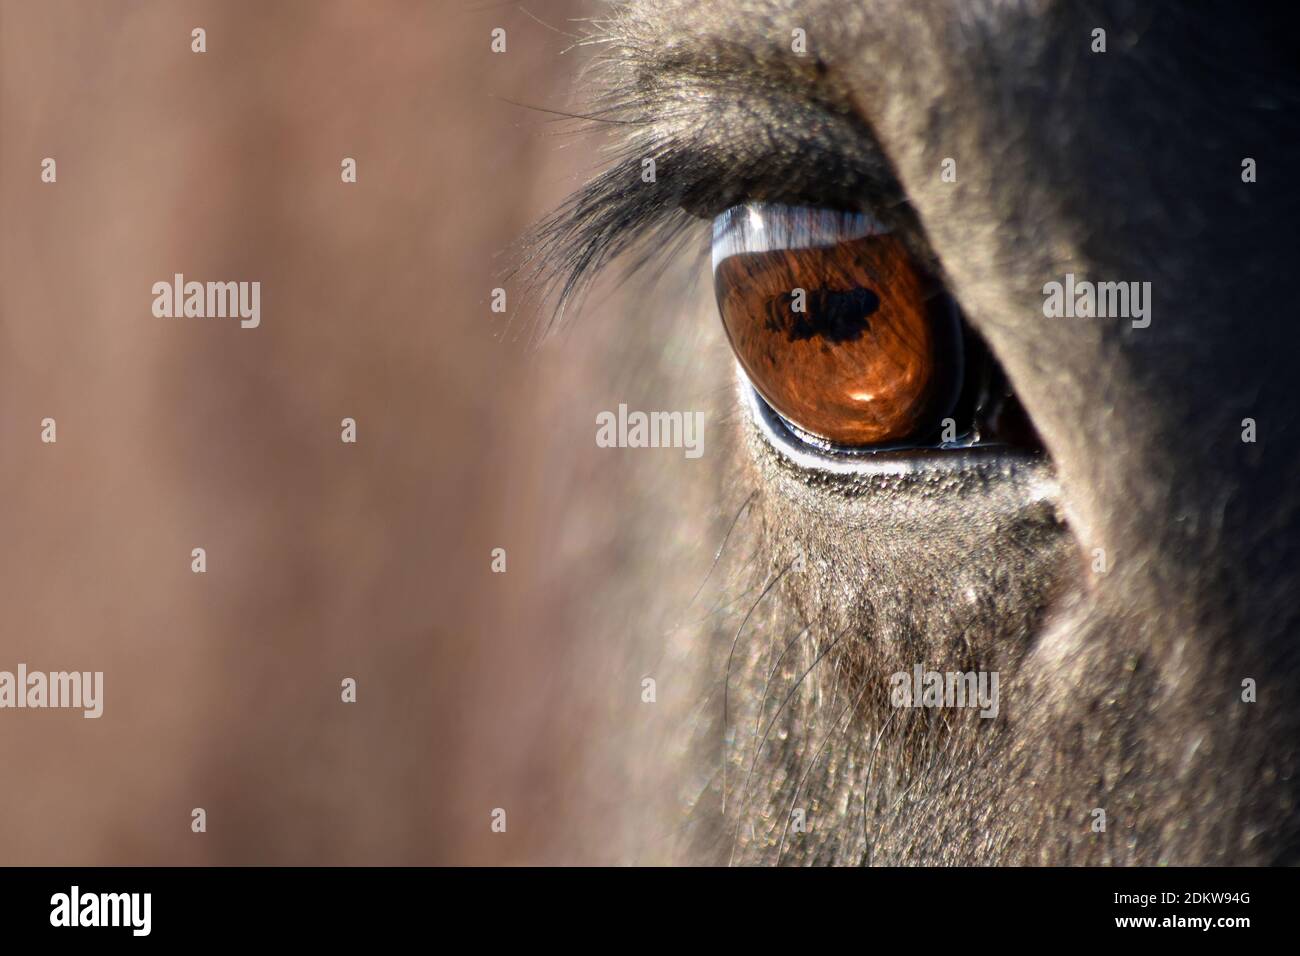 Close-up of a horse eye Stock Photo